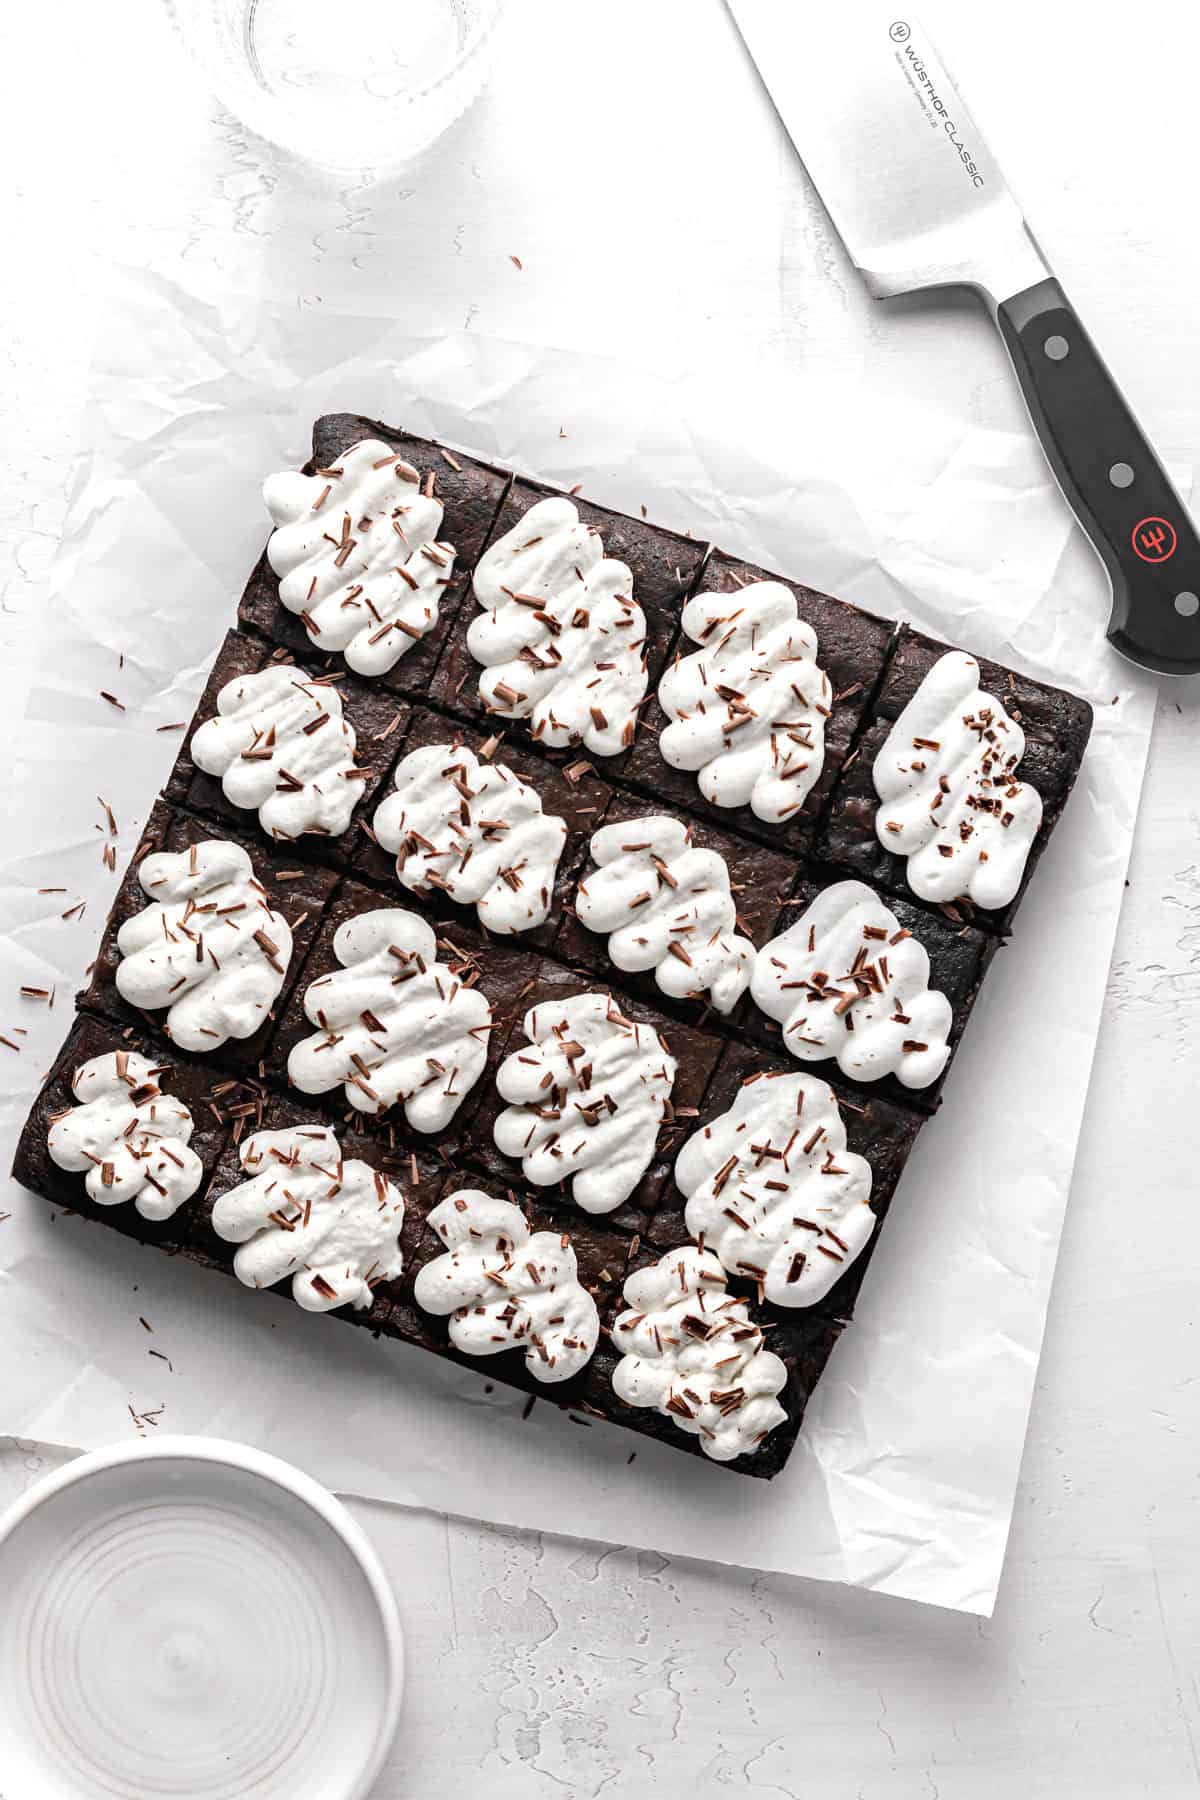 black forest brownies on parchment paper with knife.